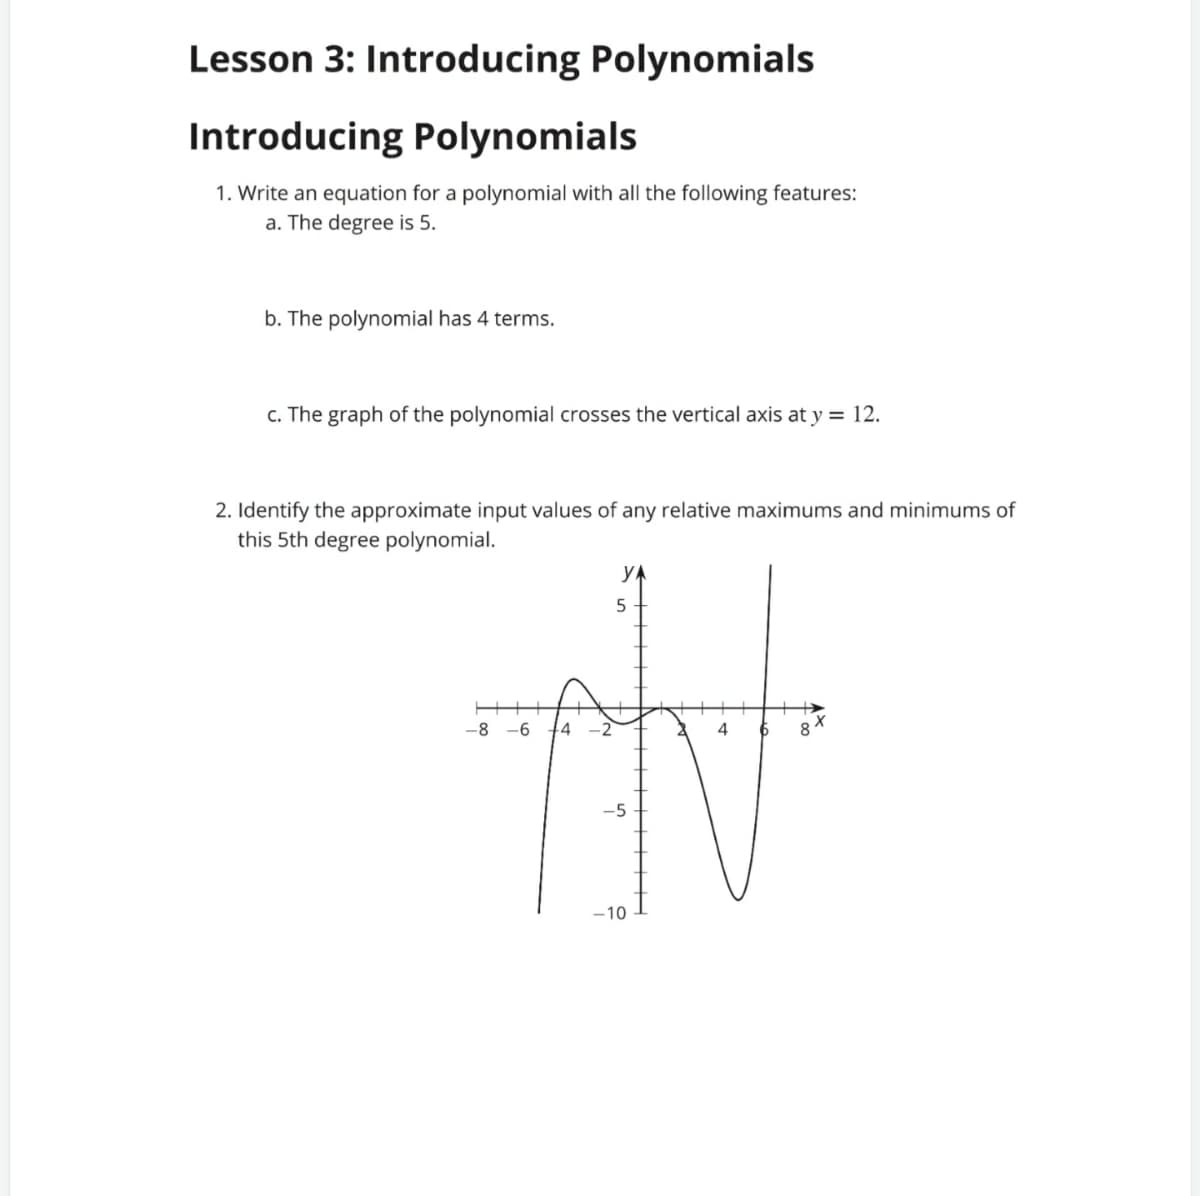 Lesson 3: Introducing Polynomials
Introducing Polynomials
1. Write an equation for a polynomial with all the following features:
a. The degree is 5.
b. The polynomial has 4 terms.
c. The graph of the polynomial crosses the vertical axis at y = 12.
2. Identify the approximate input values of any relative maximums and minimums of
this 5th degree polynomial.
yA
-8
-6
.4
4
-5
-10
